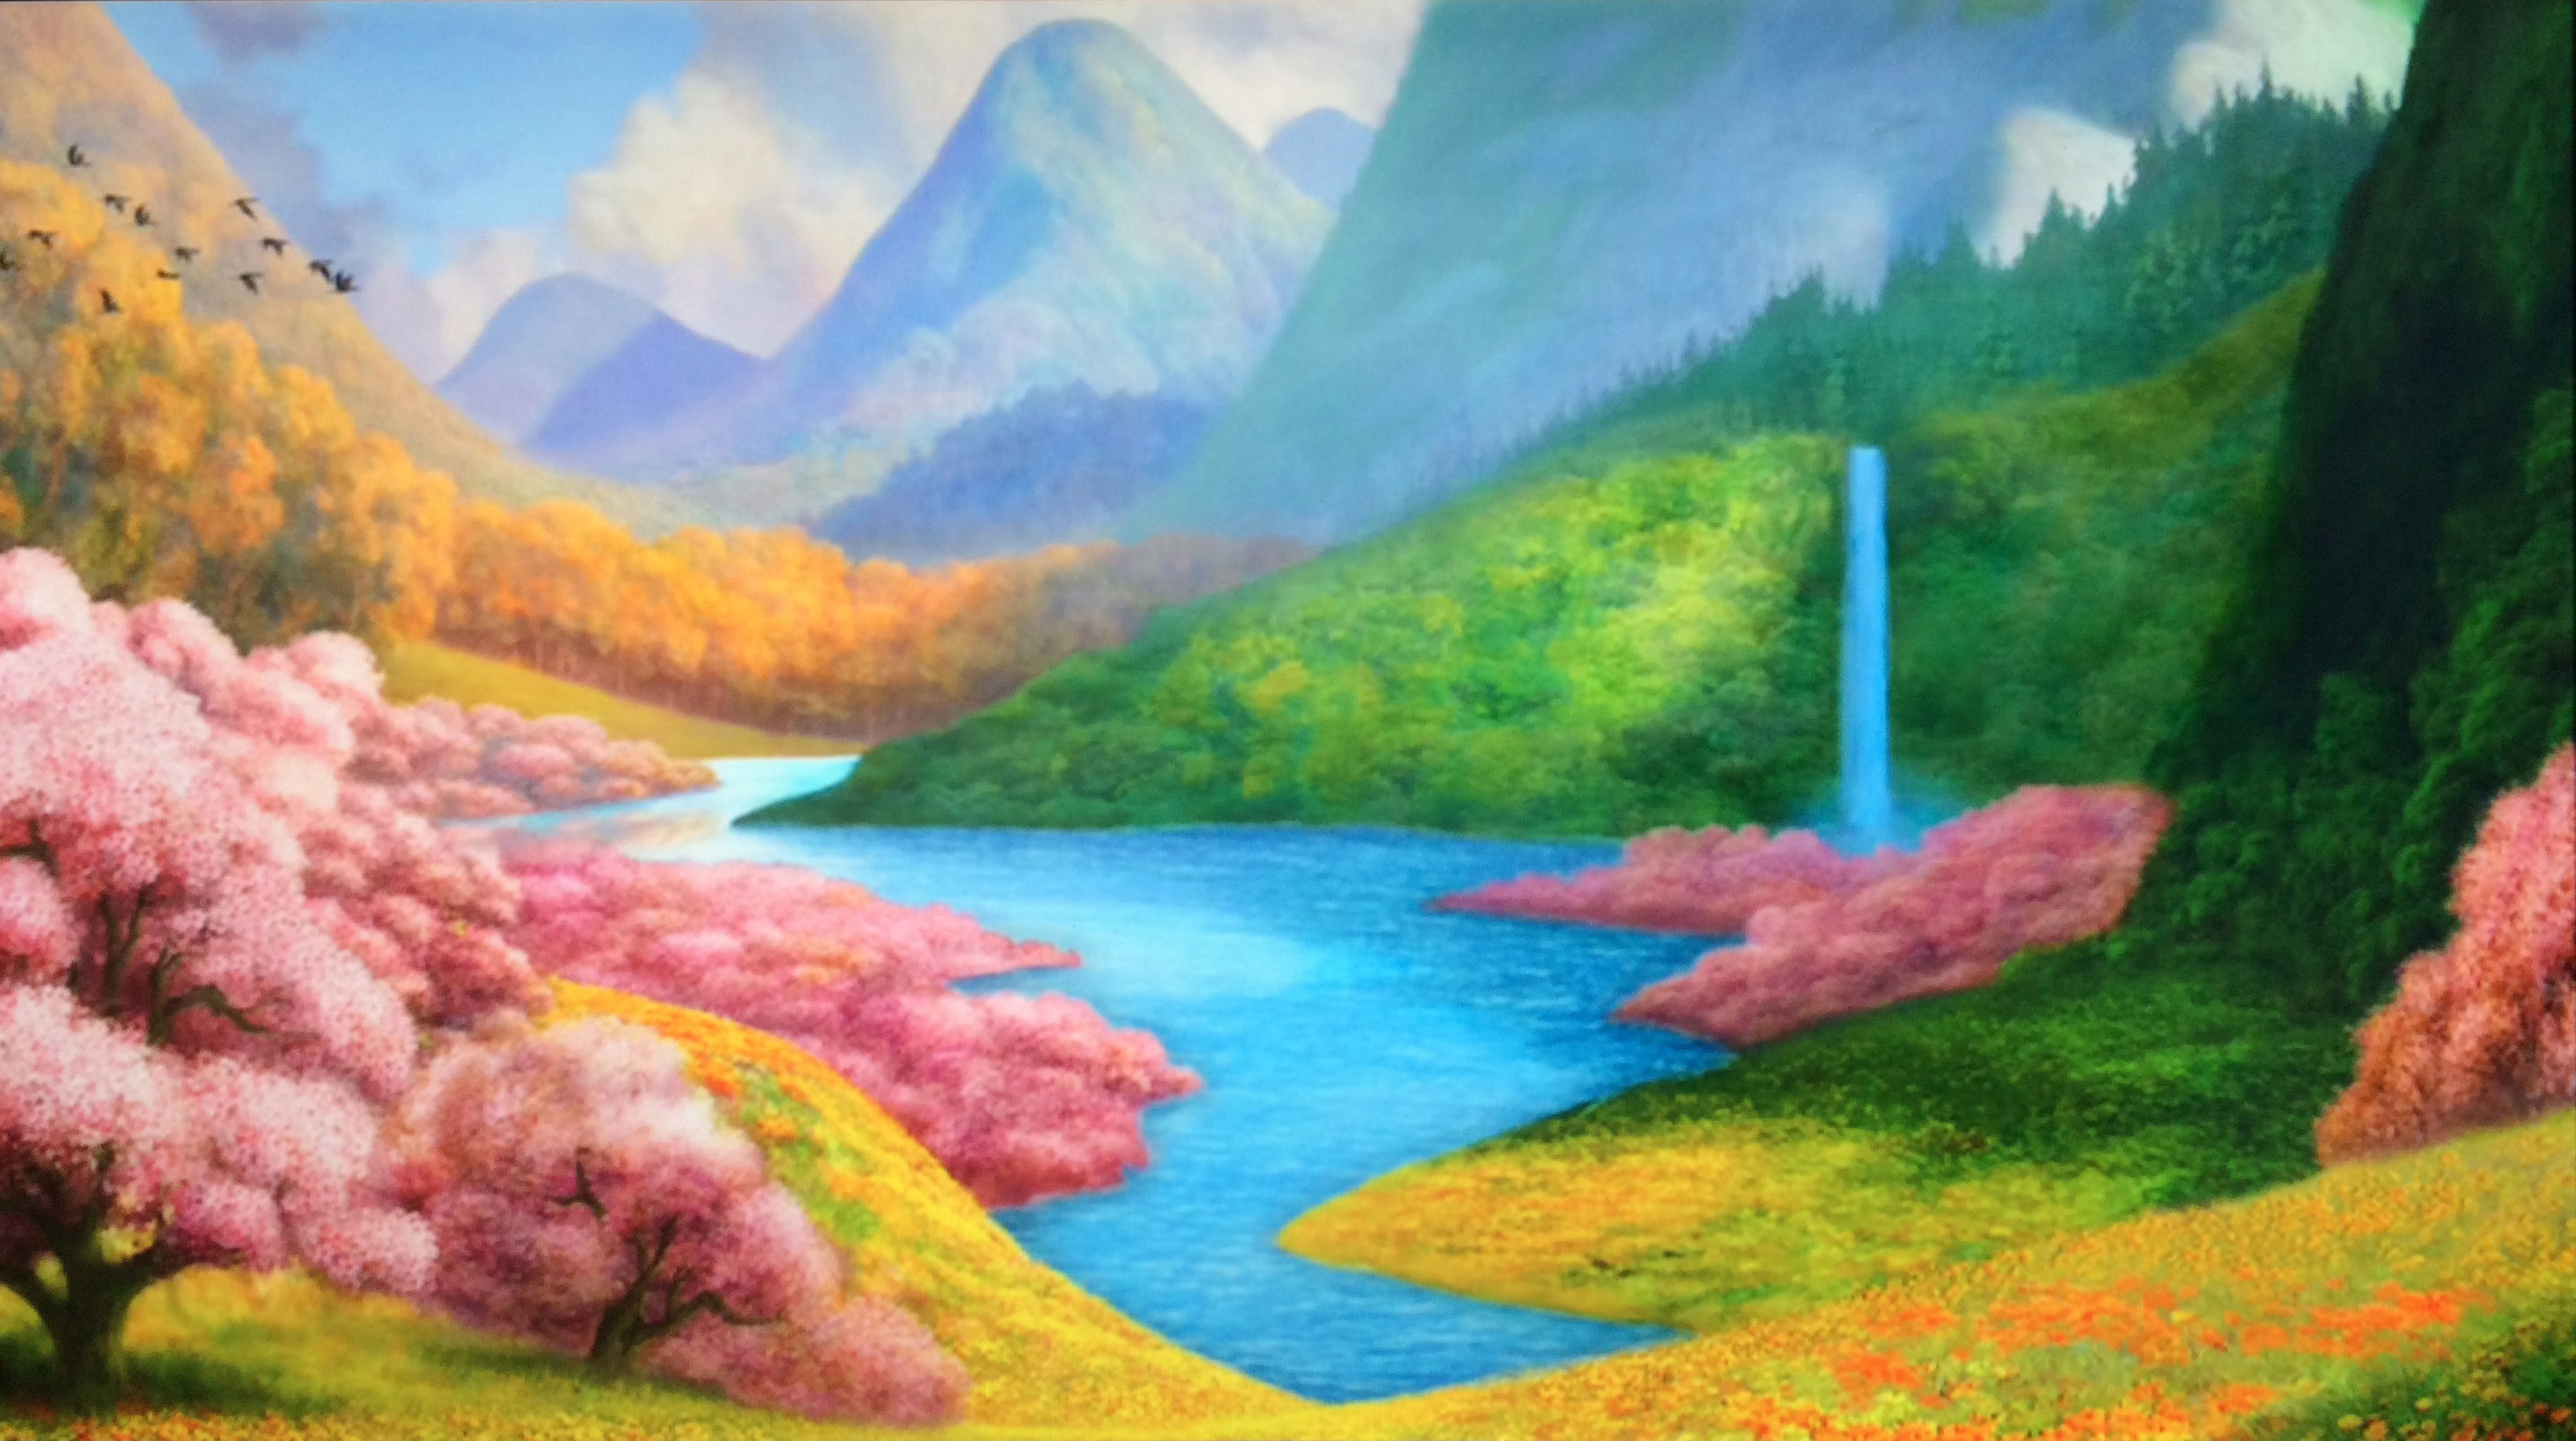 3206x1793 The initial background design, created by Barry Atkinson! You should  definitely check out more of his work. Just look at this masterpiece: